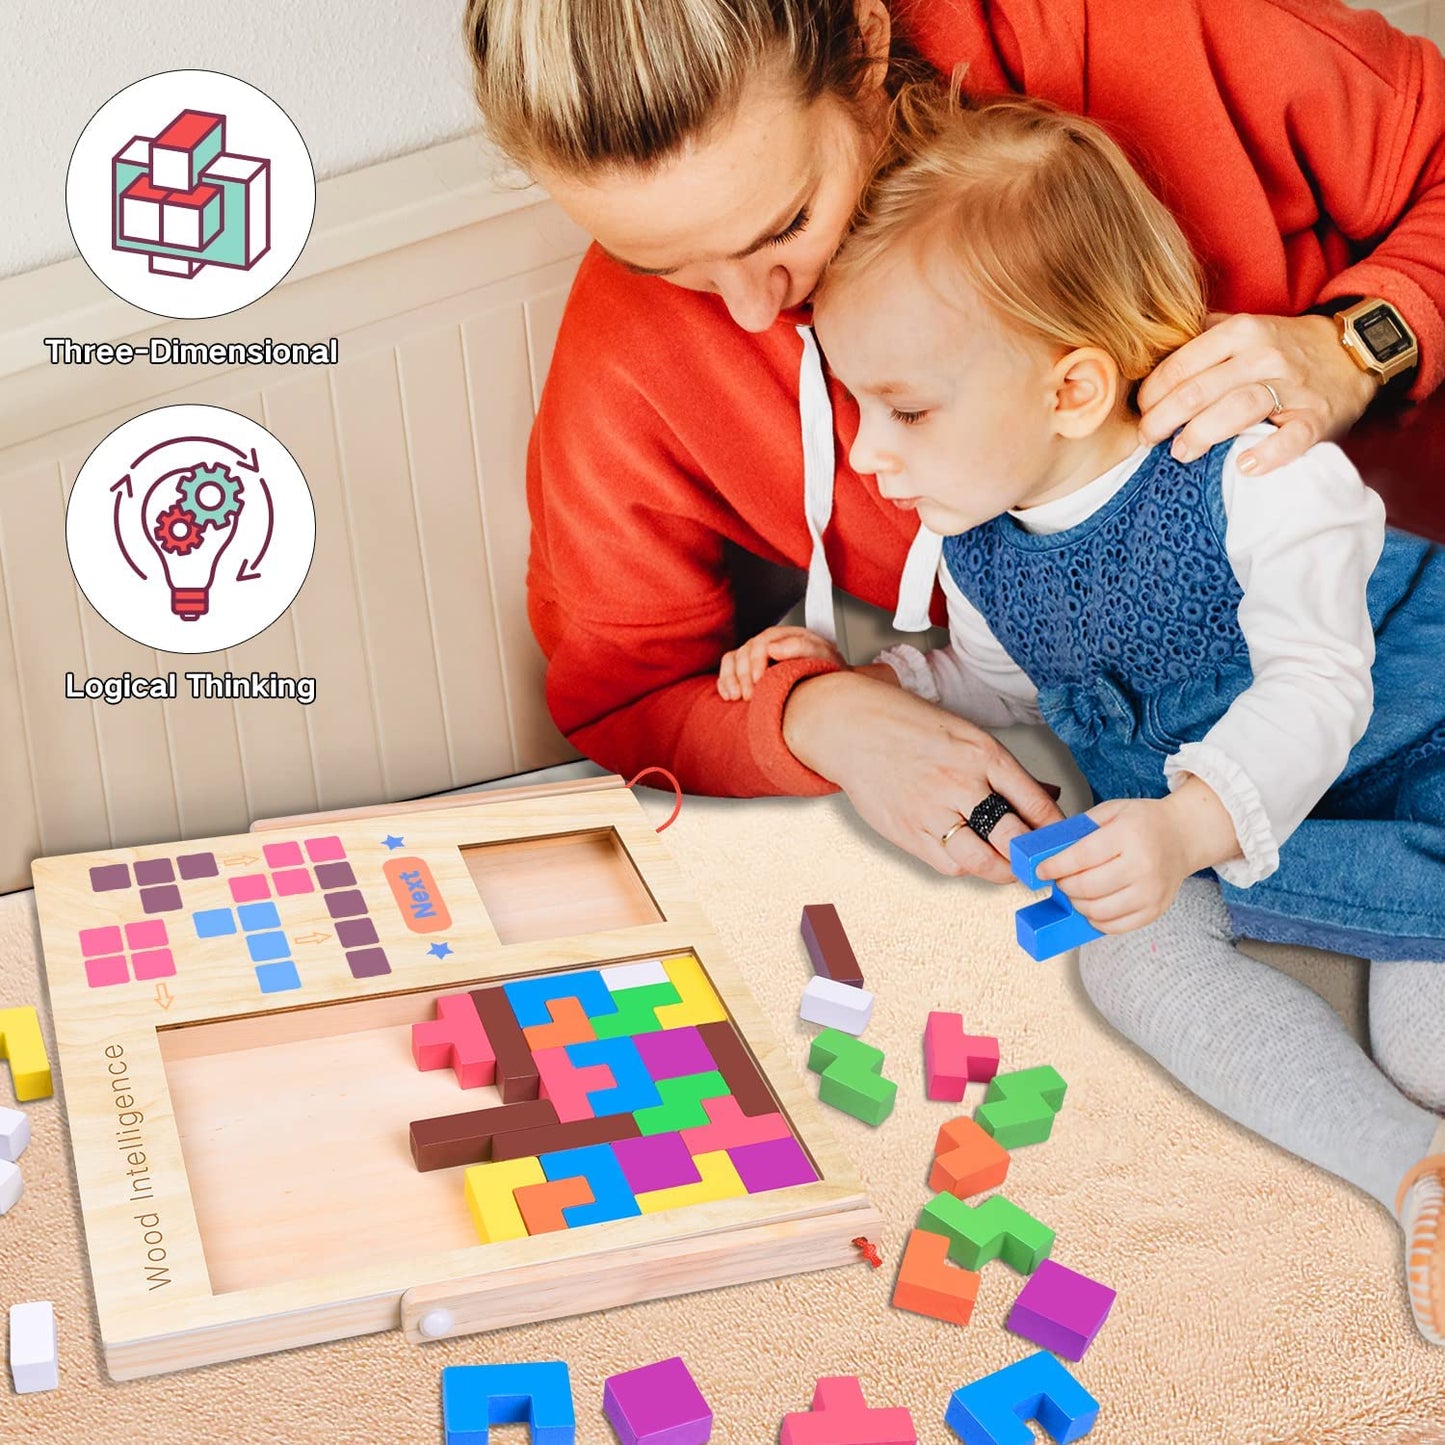 Wooden Puzzles for Kids Ages 4-8 8-10 Thick Colorful 3D Russian Blocks and Brain Teaser Tangram Jigsaw STEM Intelligence Toys Educational Gift for Toddlers 3 4 5 6 7 Years Old Boys Girls